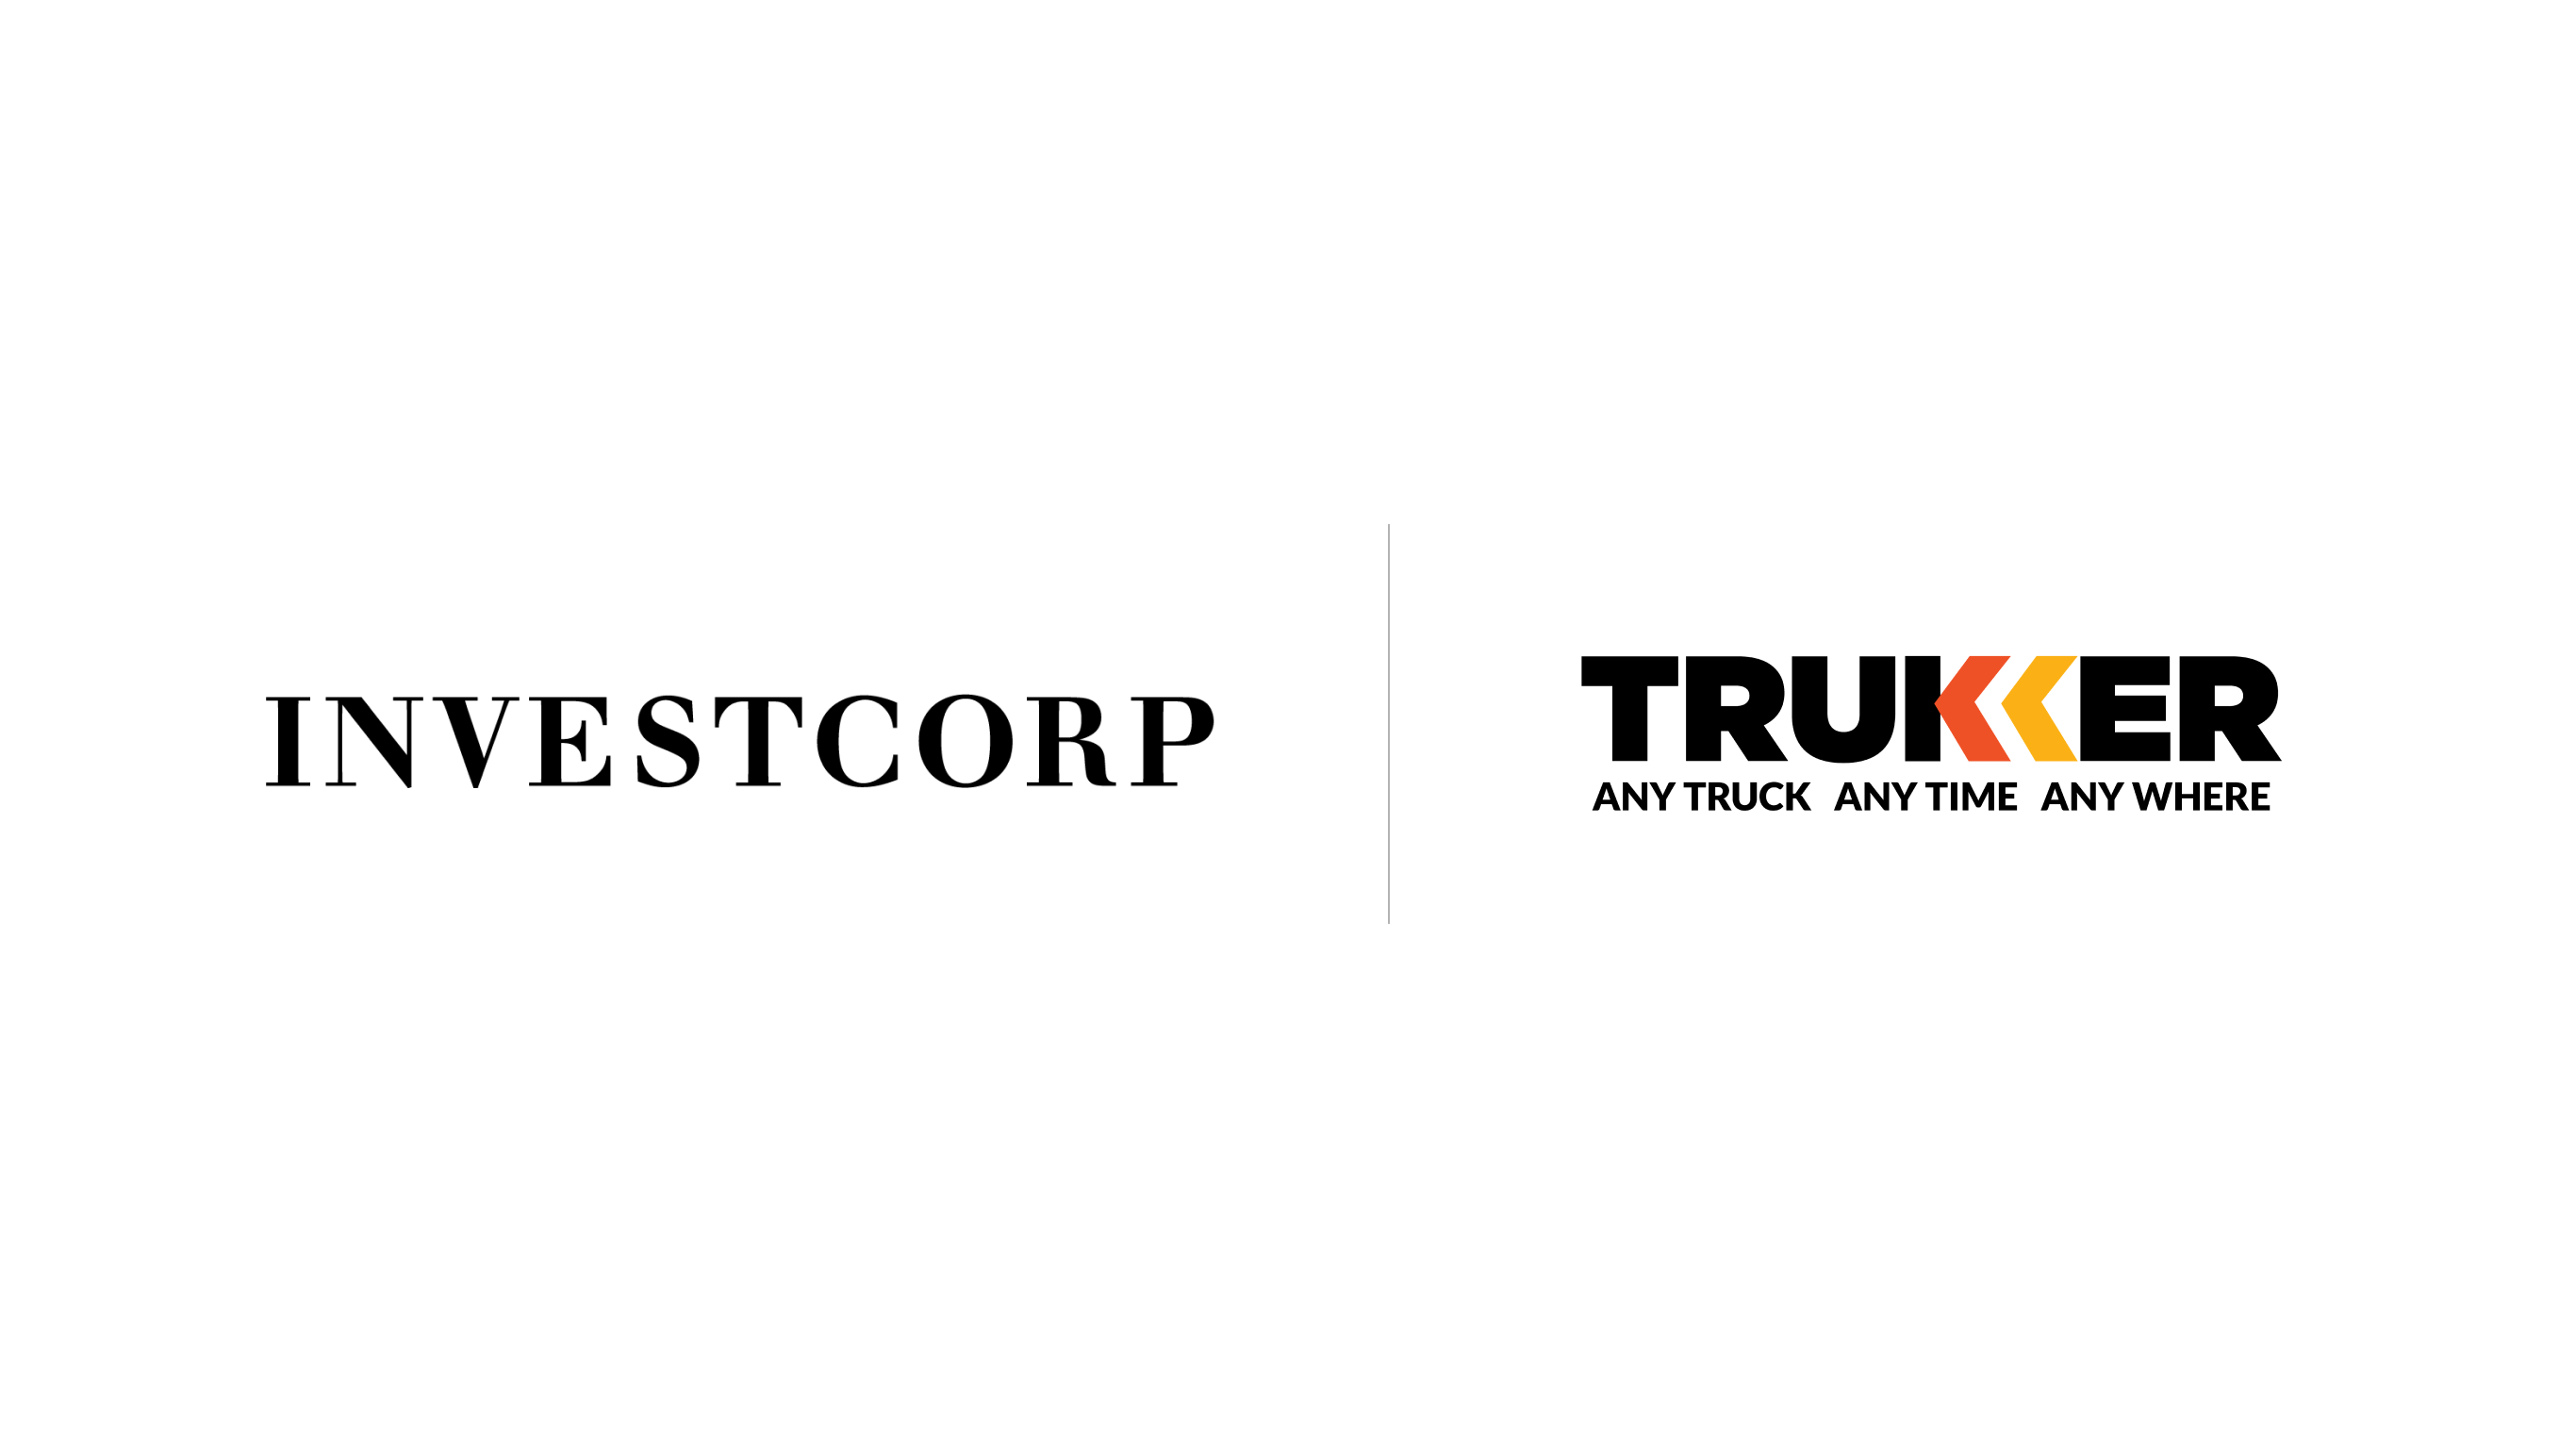 Tech & Product DD | Growth | Code & Co. advises Investcorp on TruKKer